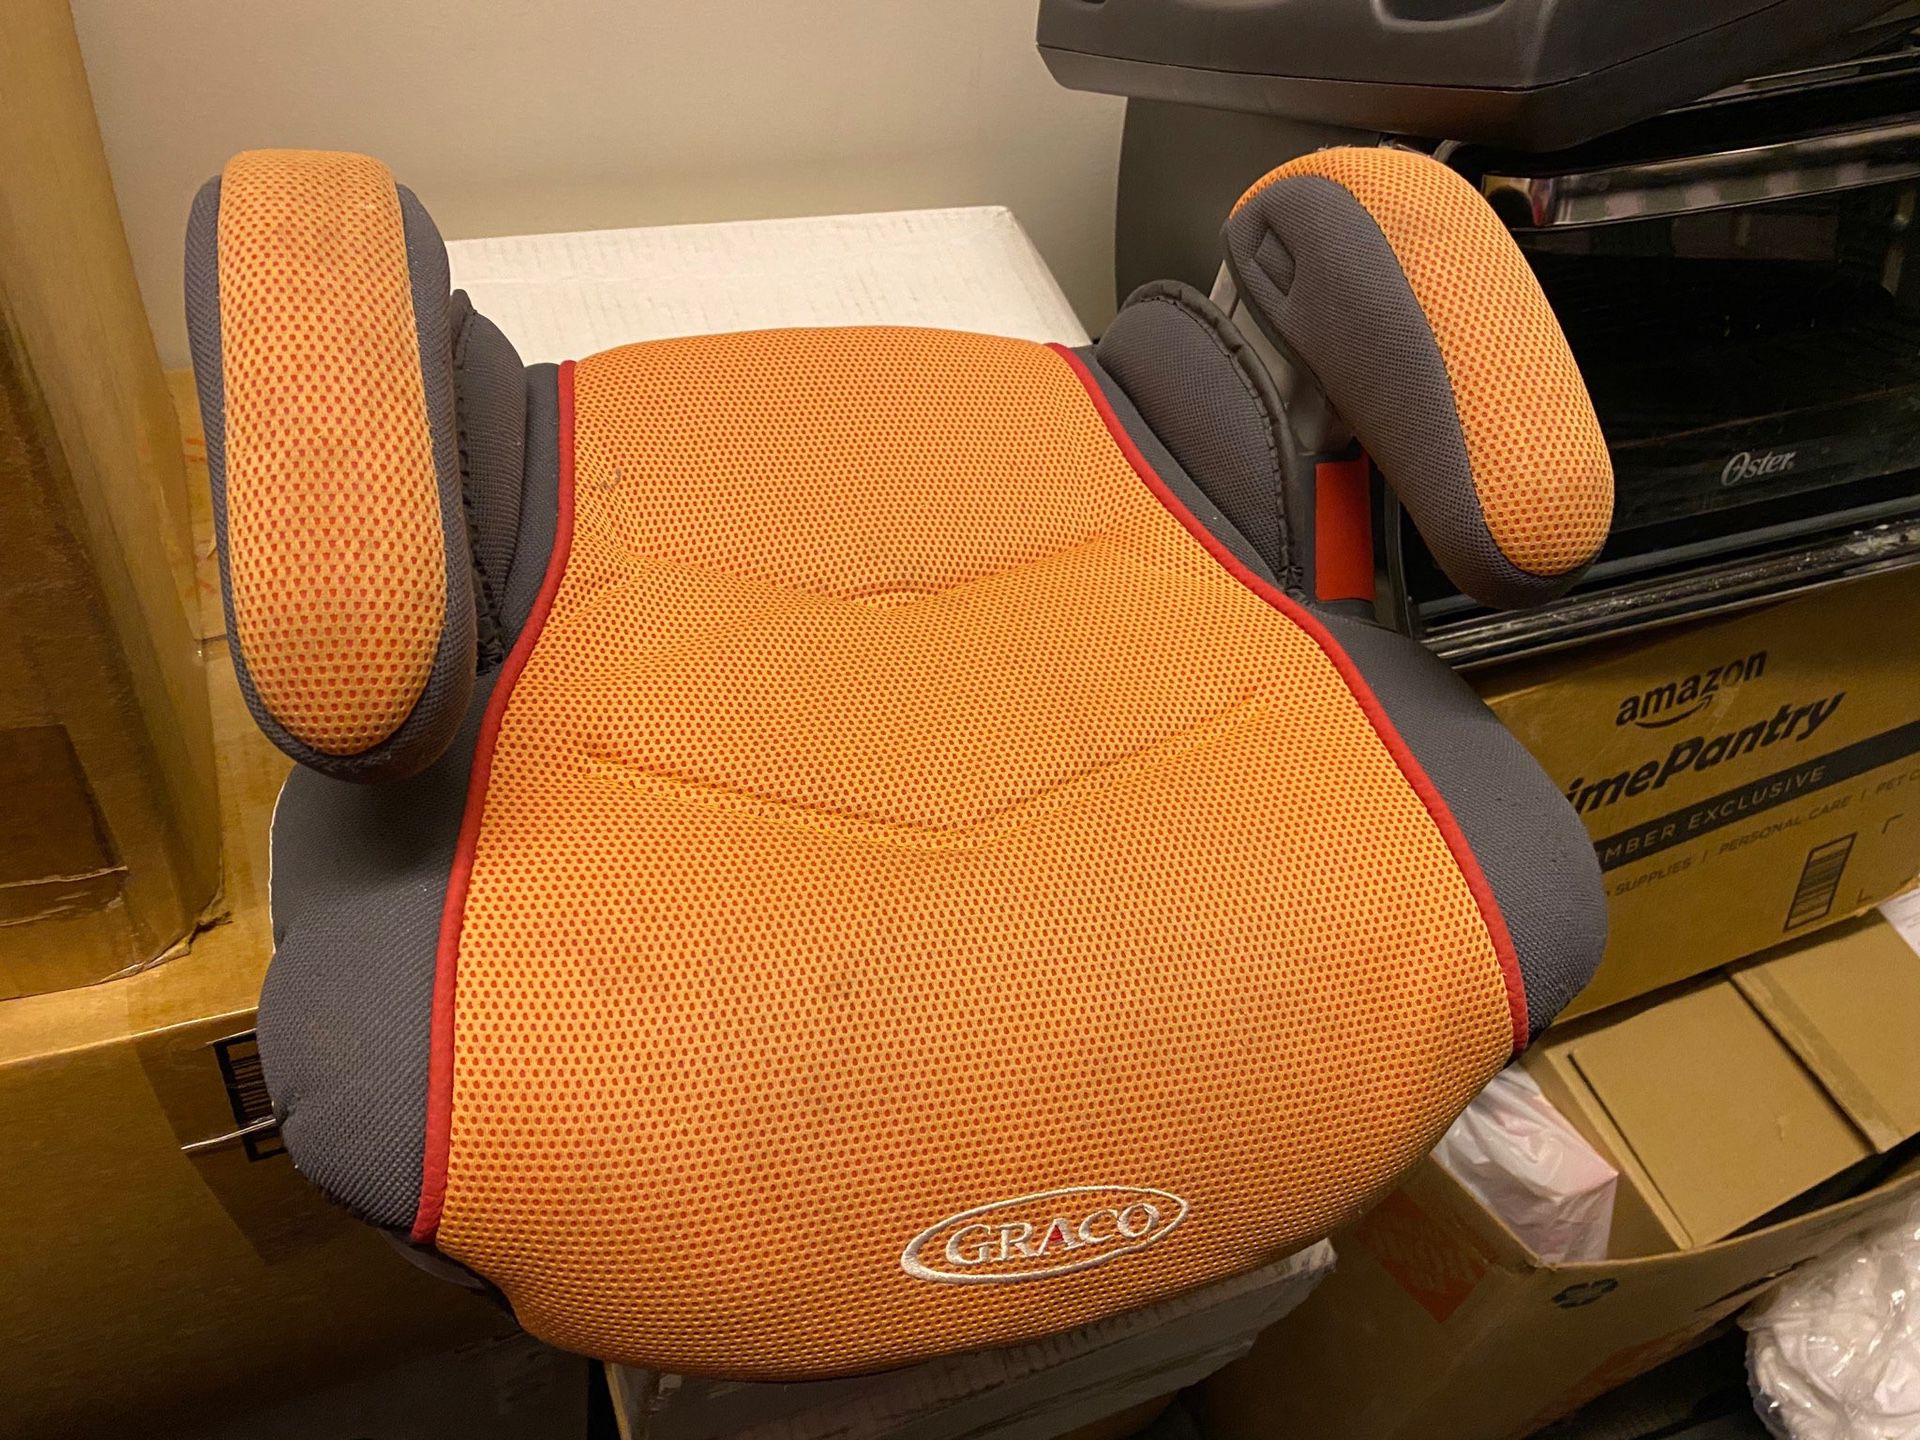 Backless booster seat Graco